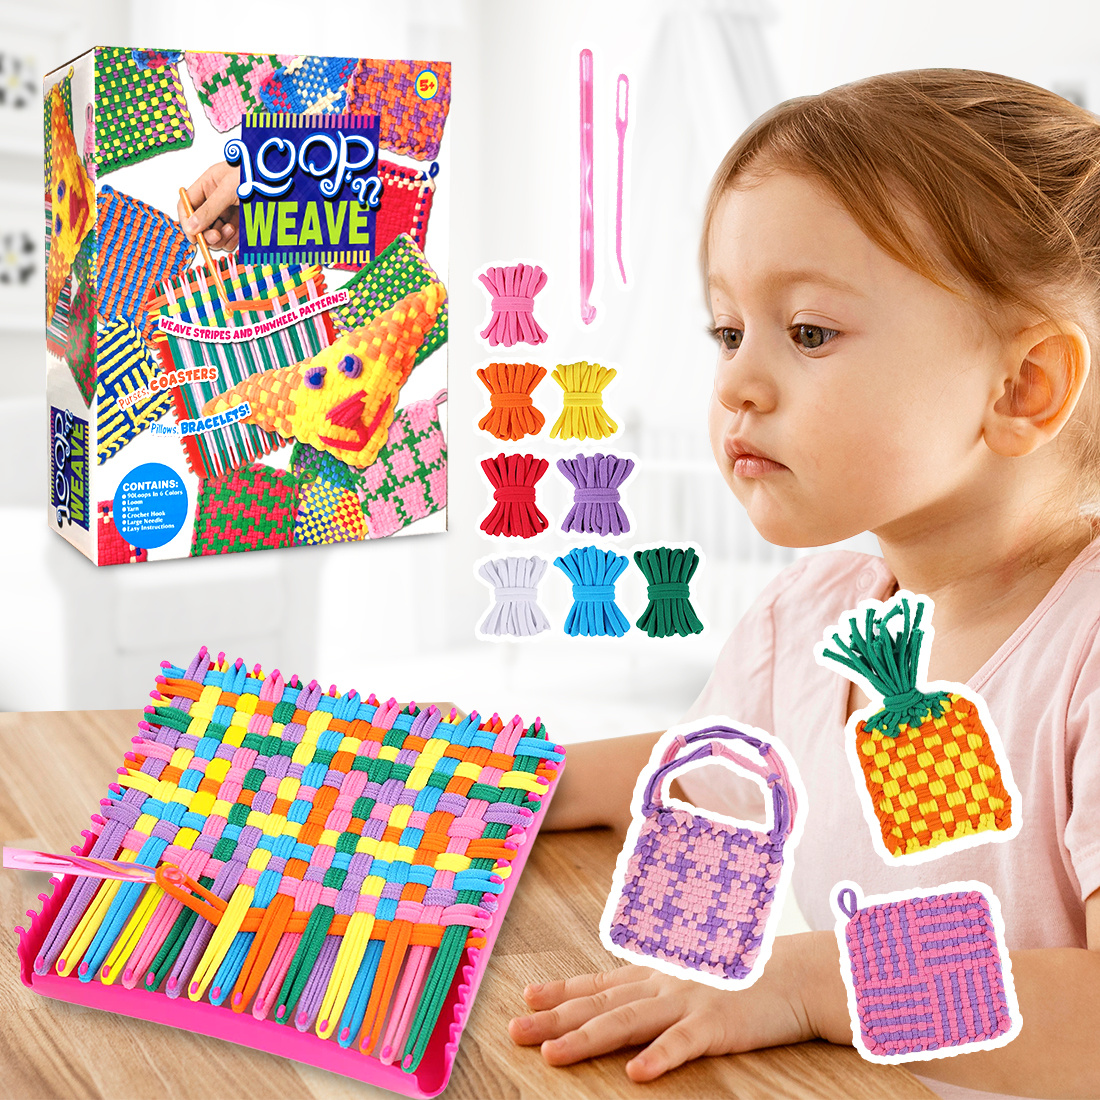 Weaving Loom Kit Toys For Kids Beginners, DIY Art And Craft Mini Loom  Handcraft Including Crafting Kit, Loom Frame, Colored Loops And  Instructions, Id